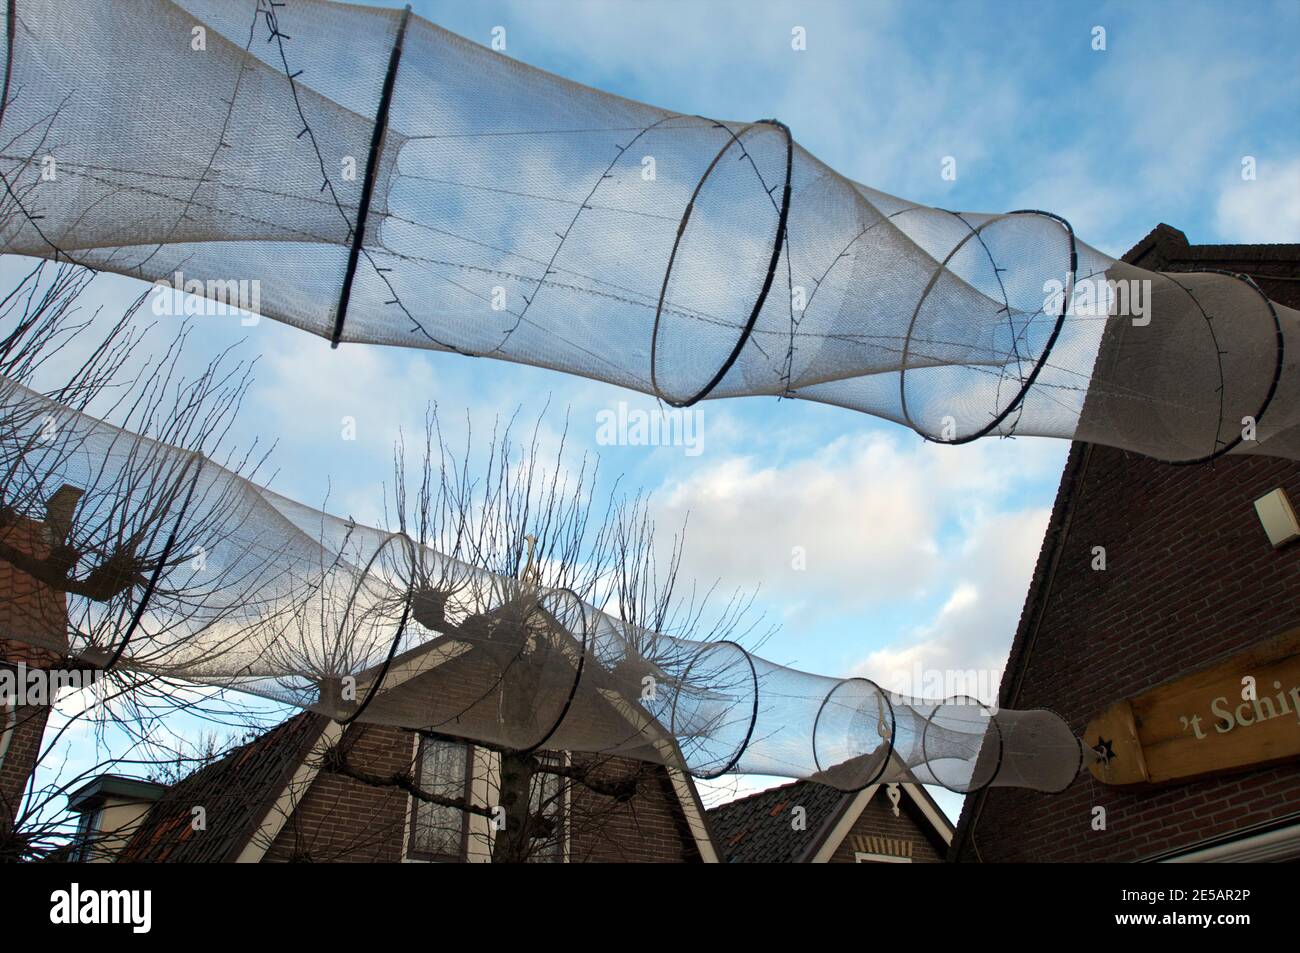 Fishing nets hanging to dry outside in the open air museum of the village of Spakenburg, the Netherlands Stock Photo